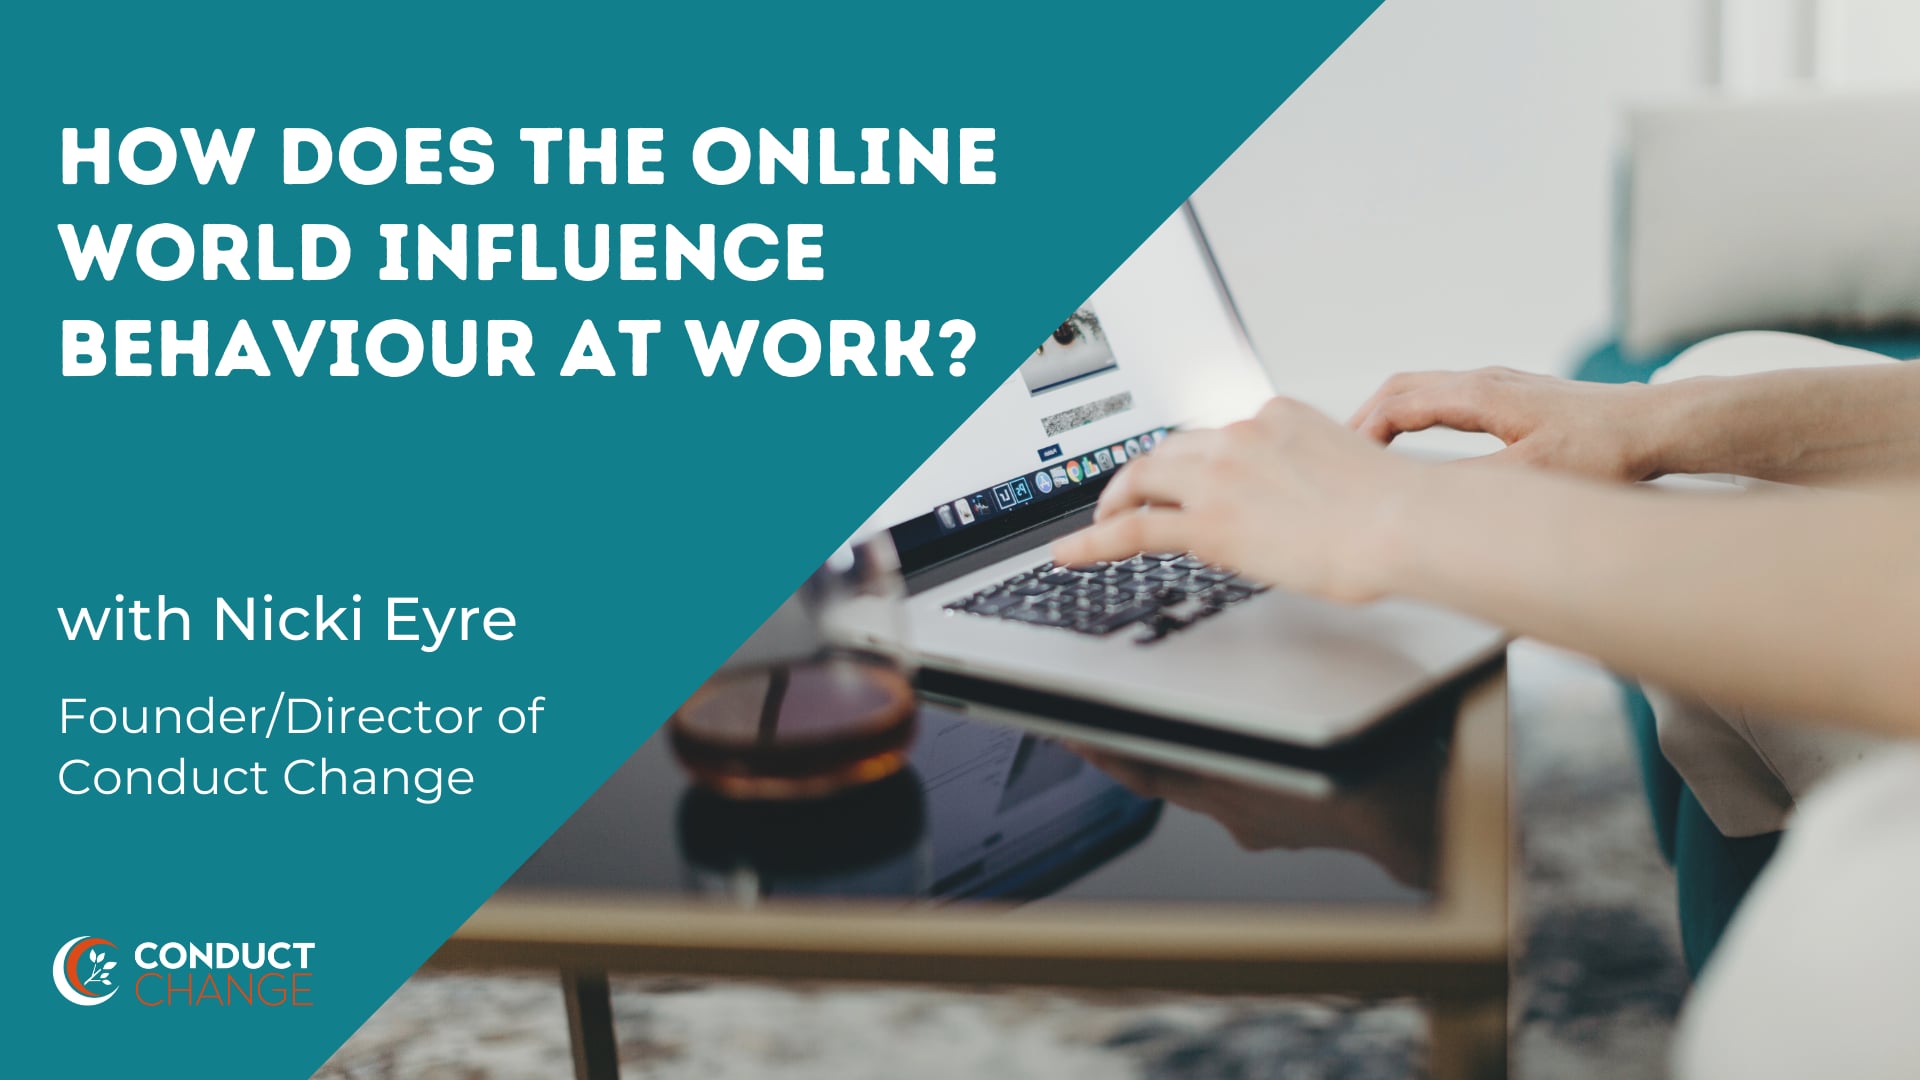 How is the online world influencing behaviour at work?